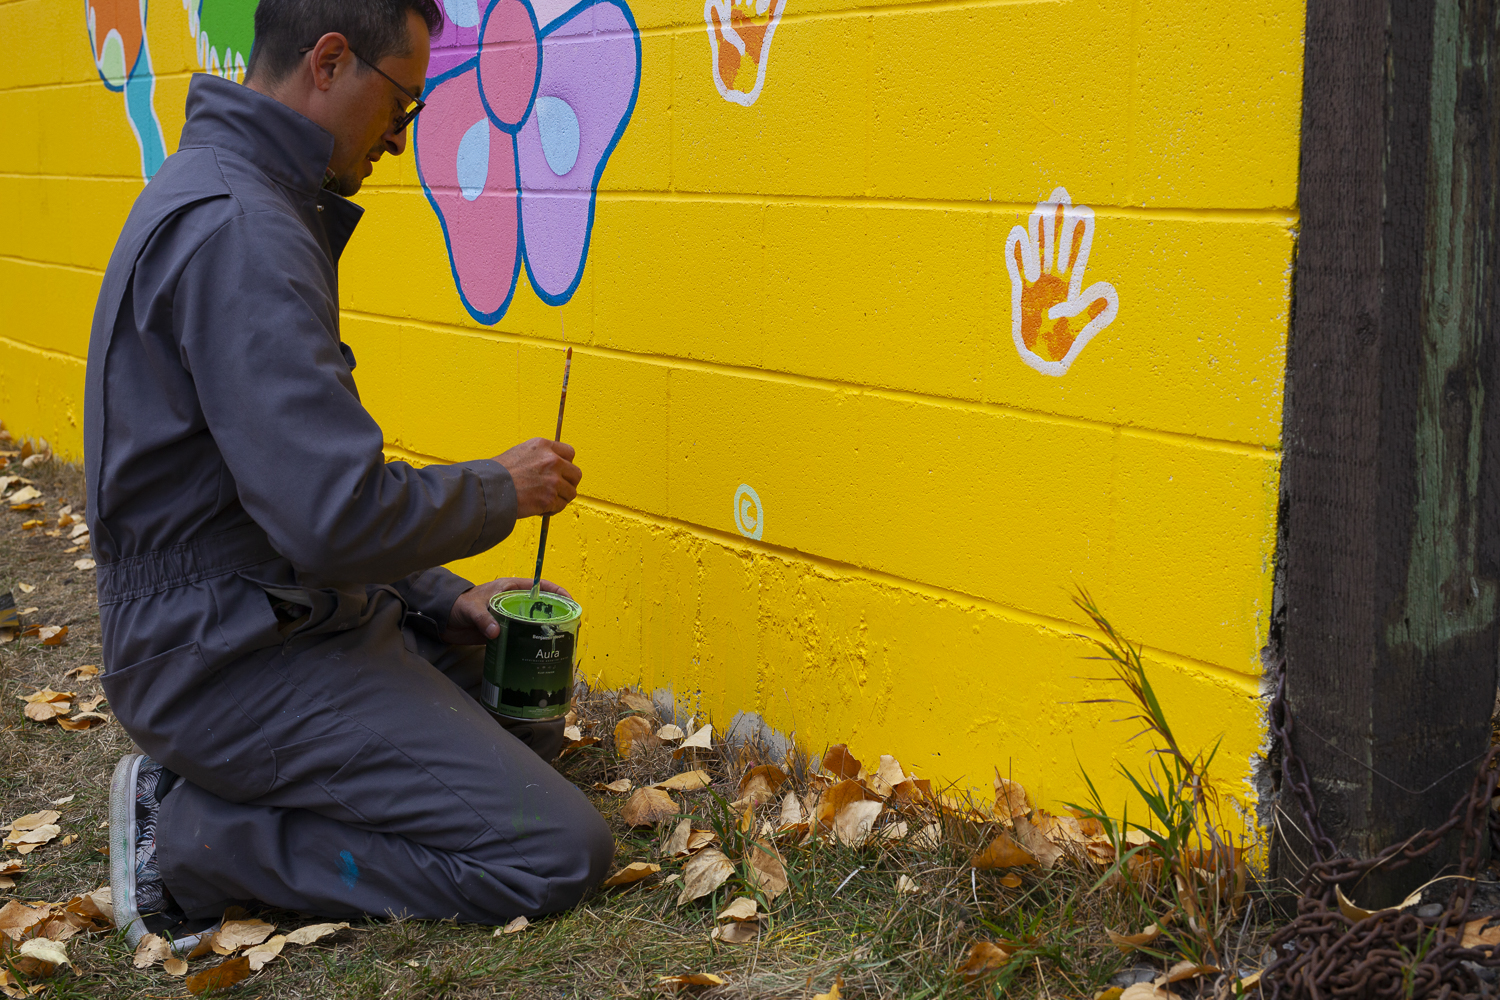 Photo of Bruno Canadien dipping a paintbrush in green paint, he is kneeling on some grass with leaves, about to paint his mural. The mural has colours of pink, purple, blue and orange on a yellow background.